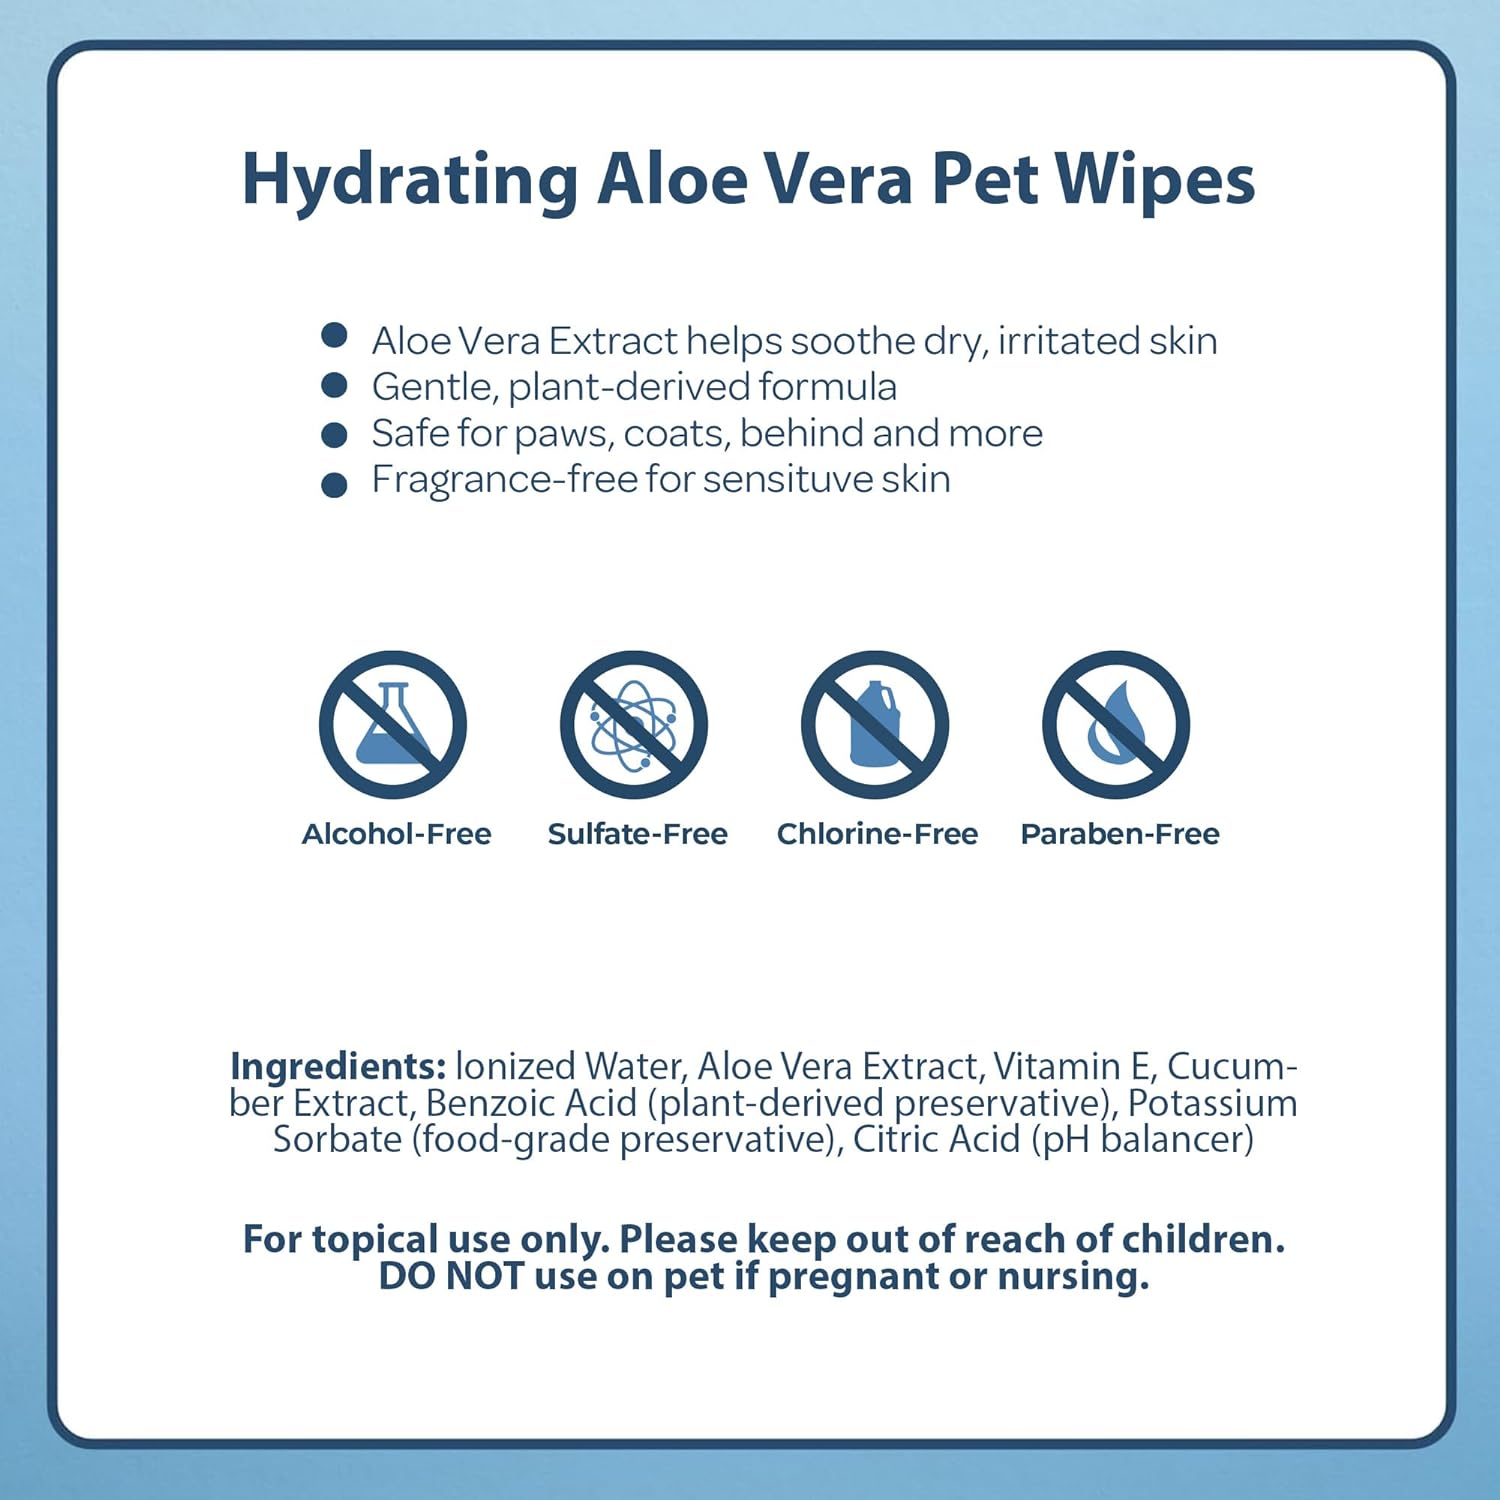 Best Pet Supplies 8" x 9" Pet Grooming Wipes for Dogs & Cats, 100 Pack, Plant-Based Deodorizer for Coats & Dry, Itchy, or Sensitive Skin, Clean Ears, Paws & Butt - Hydrating Aloe Vera (Unscented)